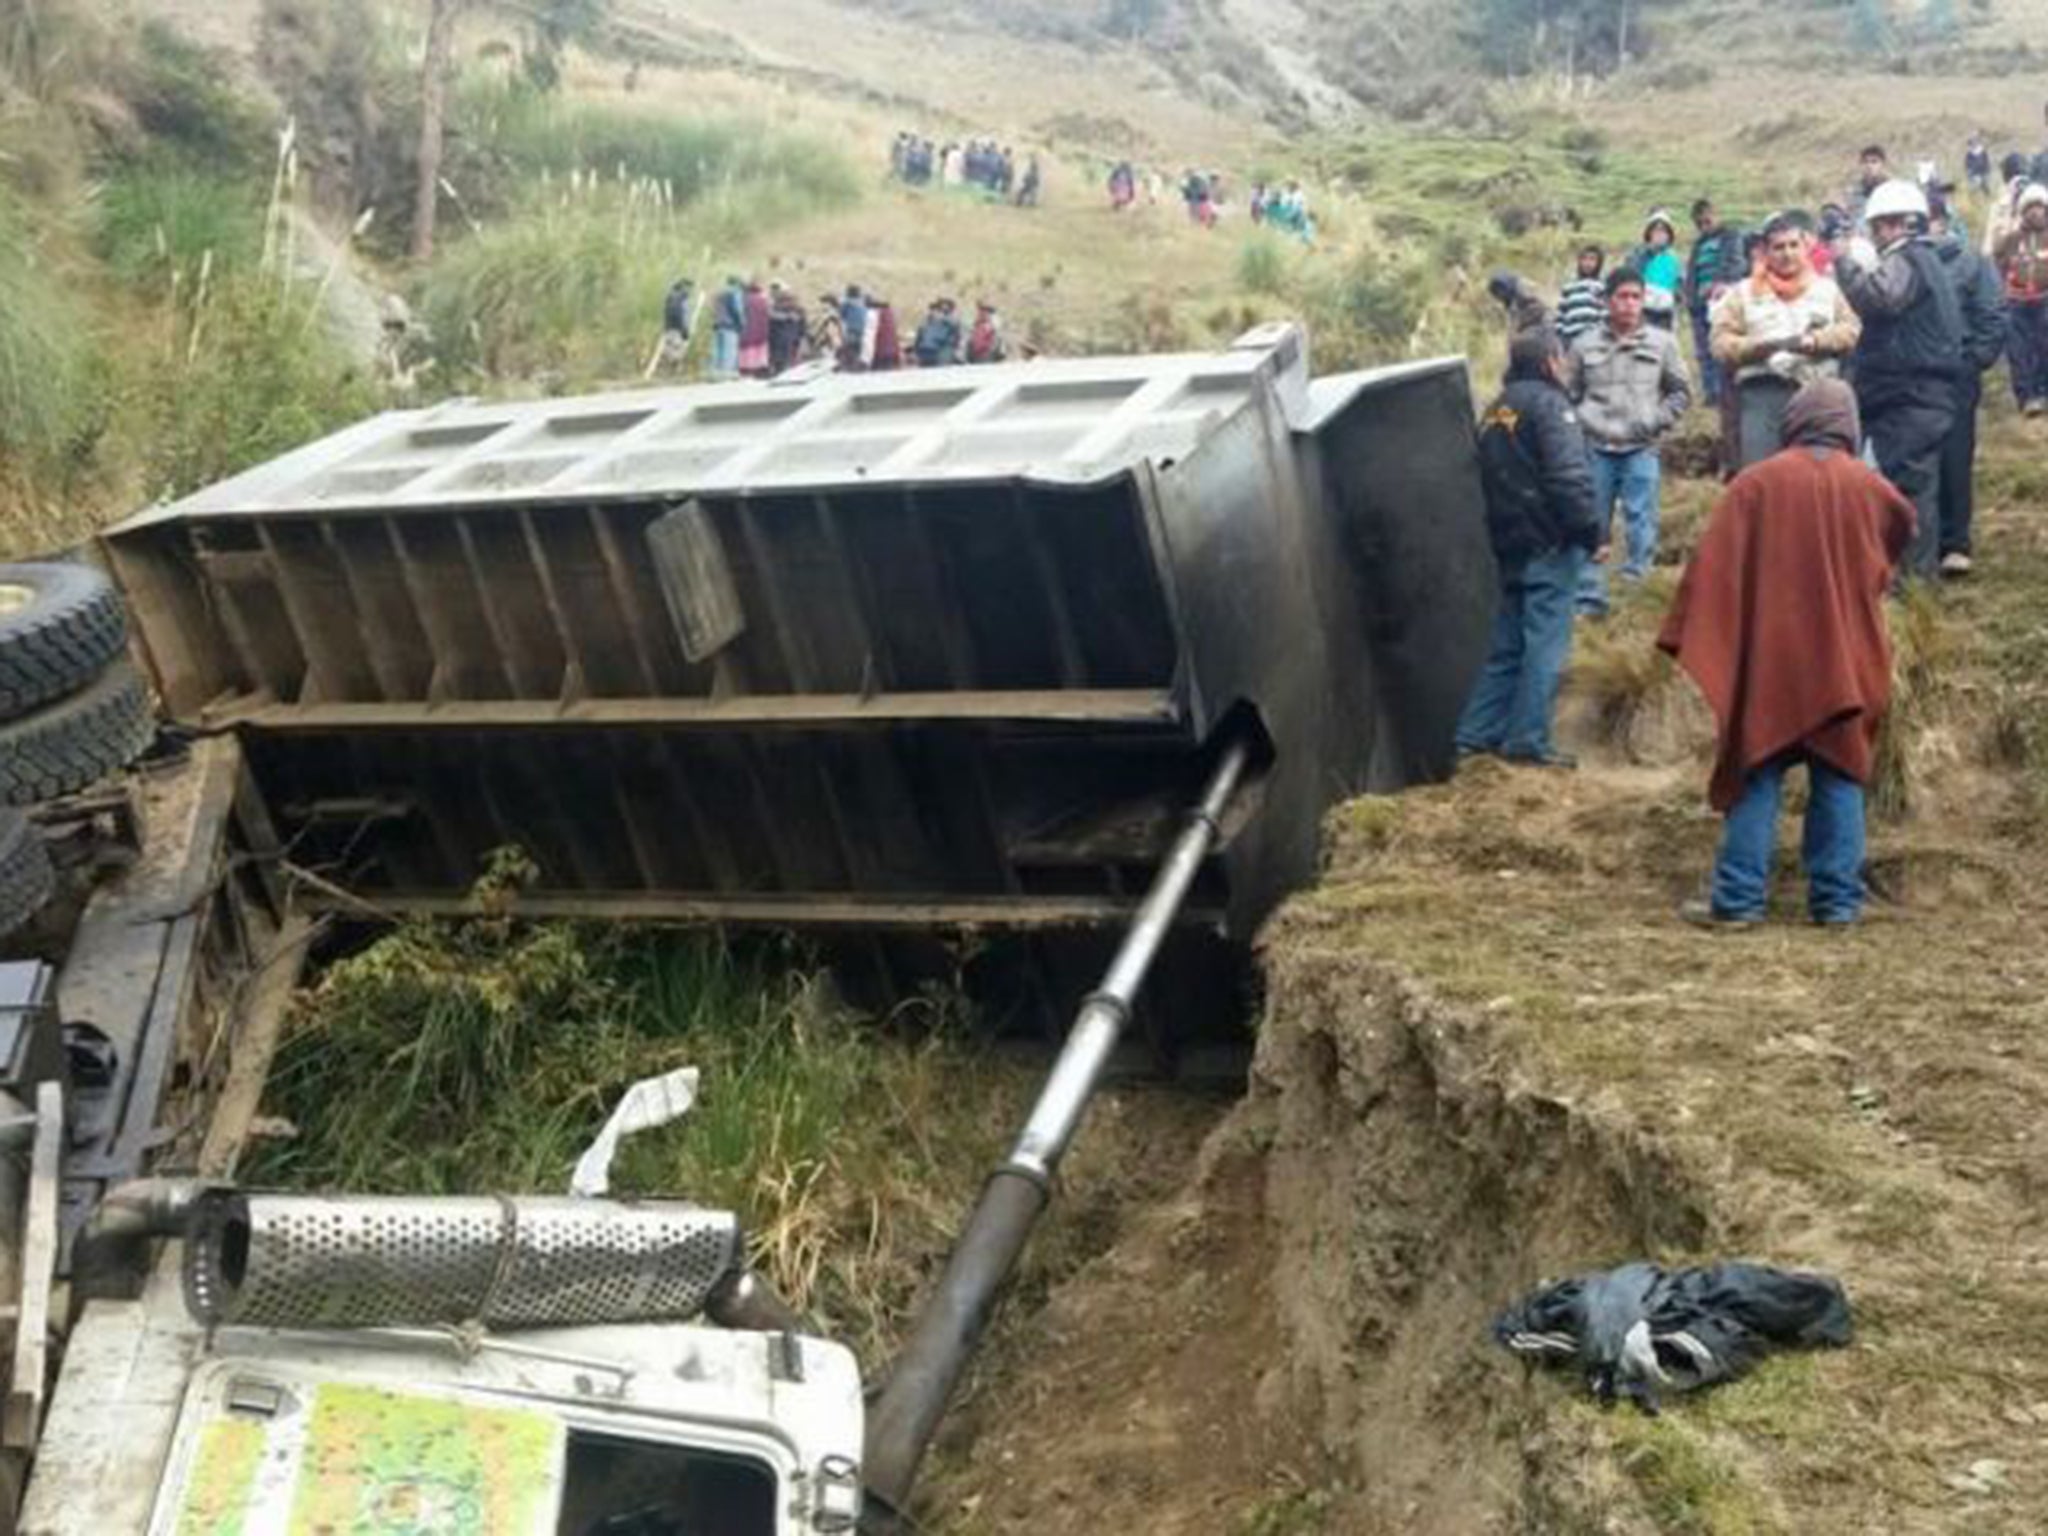 The truck - that was carrying children, parents and teachers to a school - toppled down a 100 metre high cliff, killing 17 and injuring a further 54